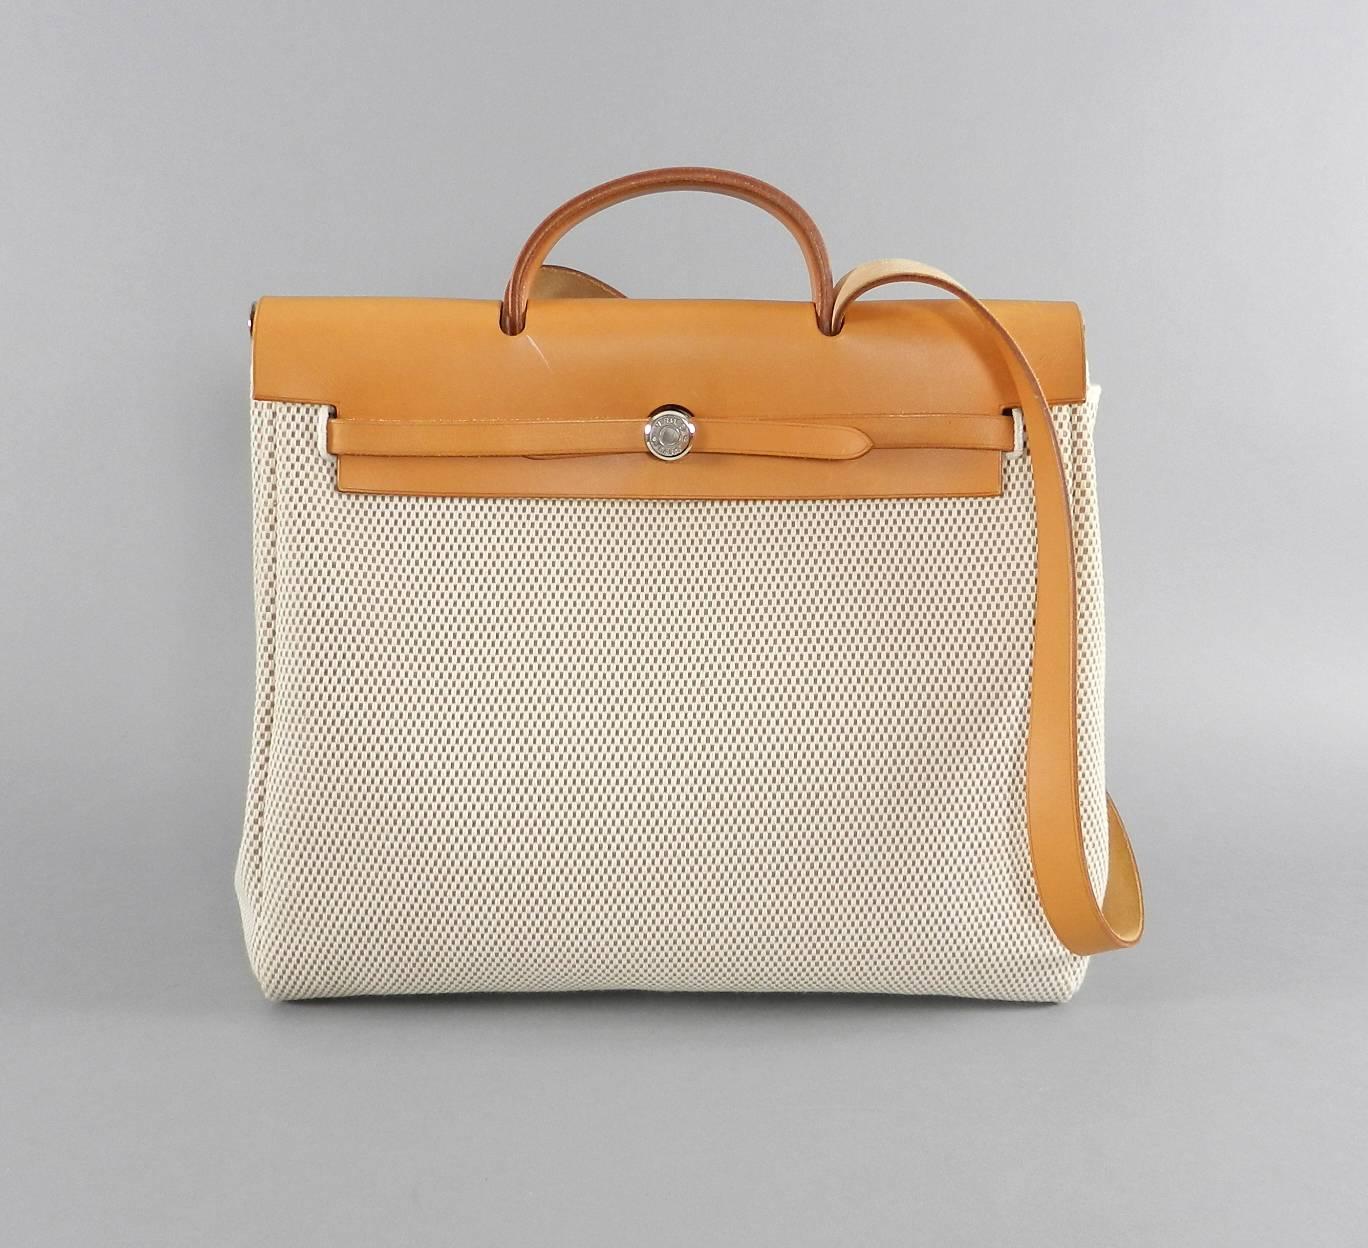 Hermes Herbag 2 in 1 Natural Toile MM.  Excellent pre-owned condition.  Toile bags are very clean interior and exterior. Natural leather top has 1 white mark across front near clasp (as pictured) and 3 faint watermarks (as pictured). Does not